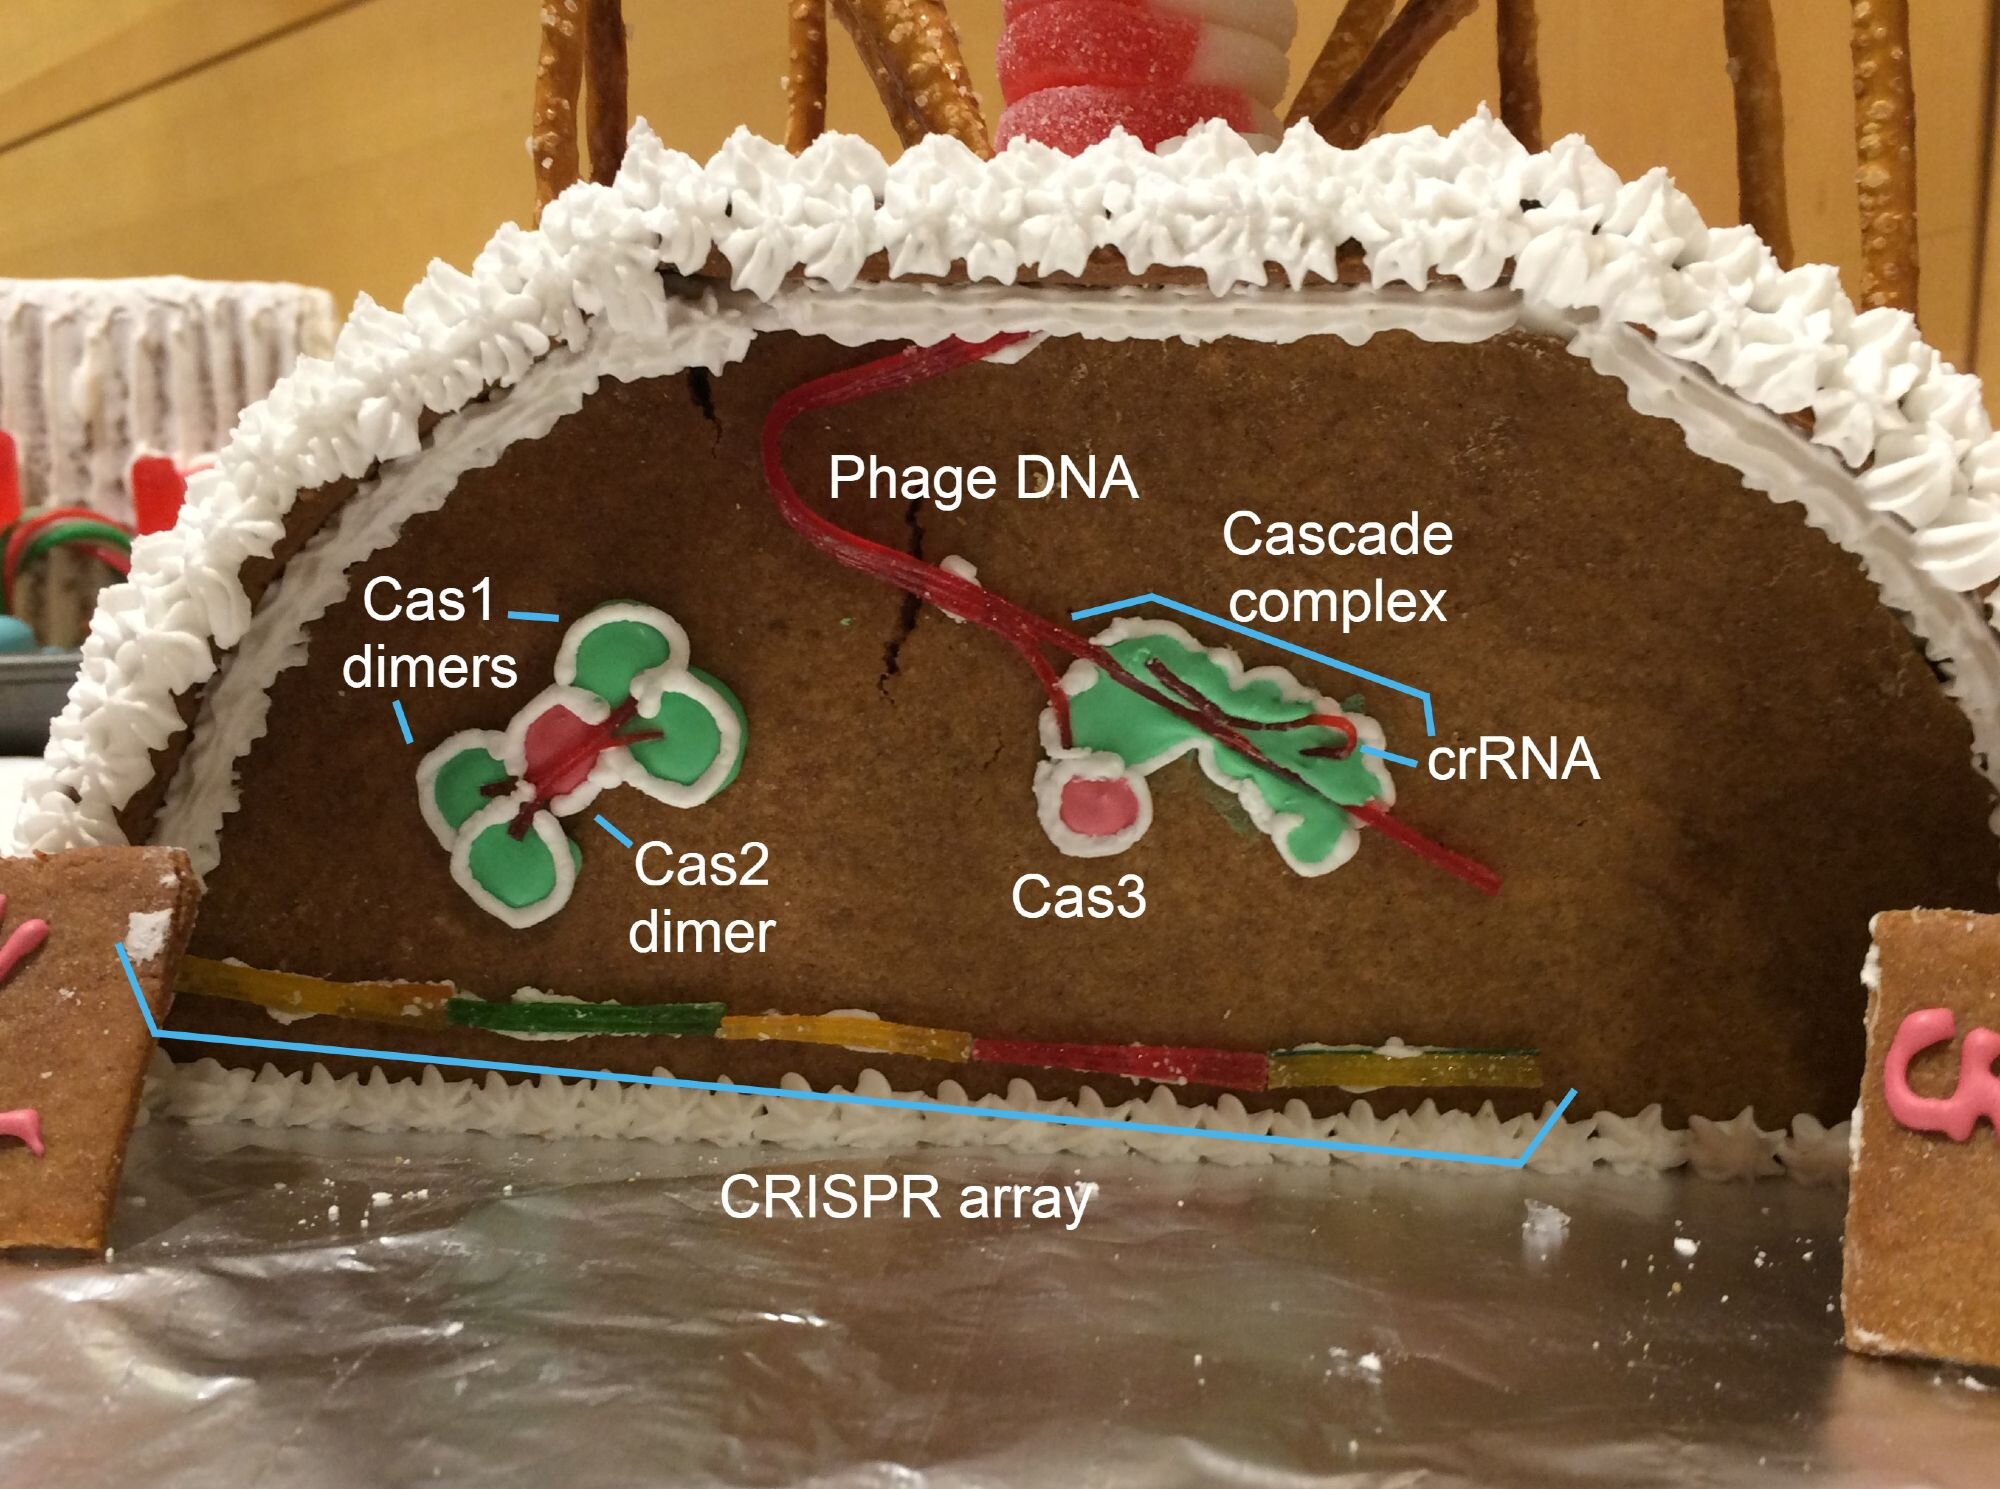  Close-up of the Crispr cut-away with added labels. Red gummy candy strands labeled “phage DNA” lead down from the top. A green icing blob, labeled  “Cascade complex” surrounds a section where the strand splits in two. The strand inside Cascade runs 